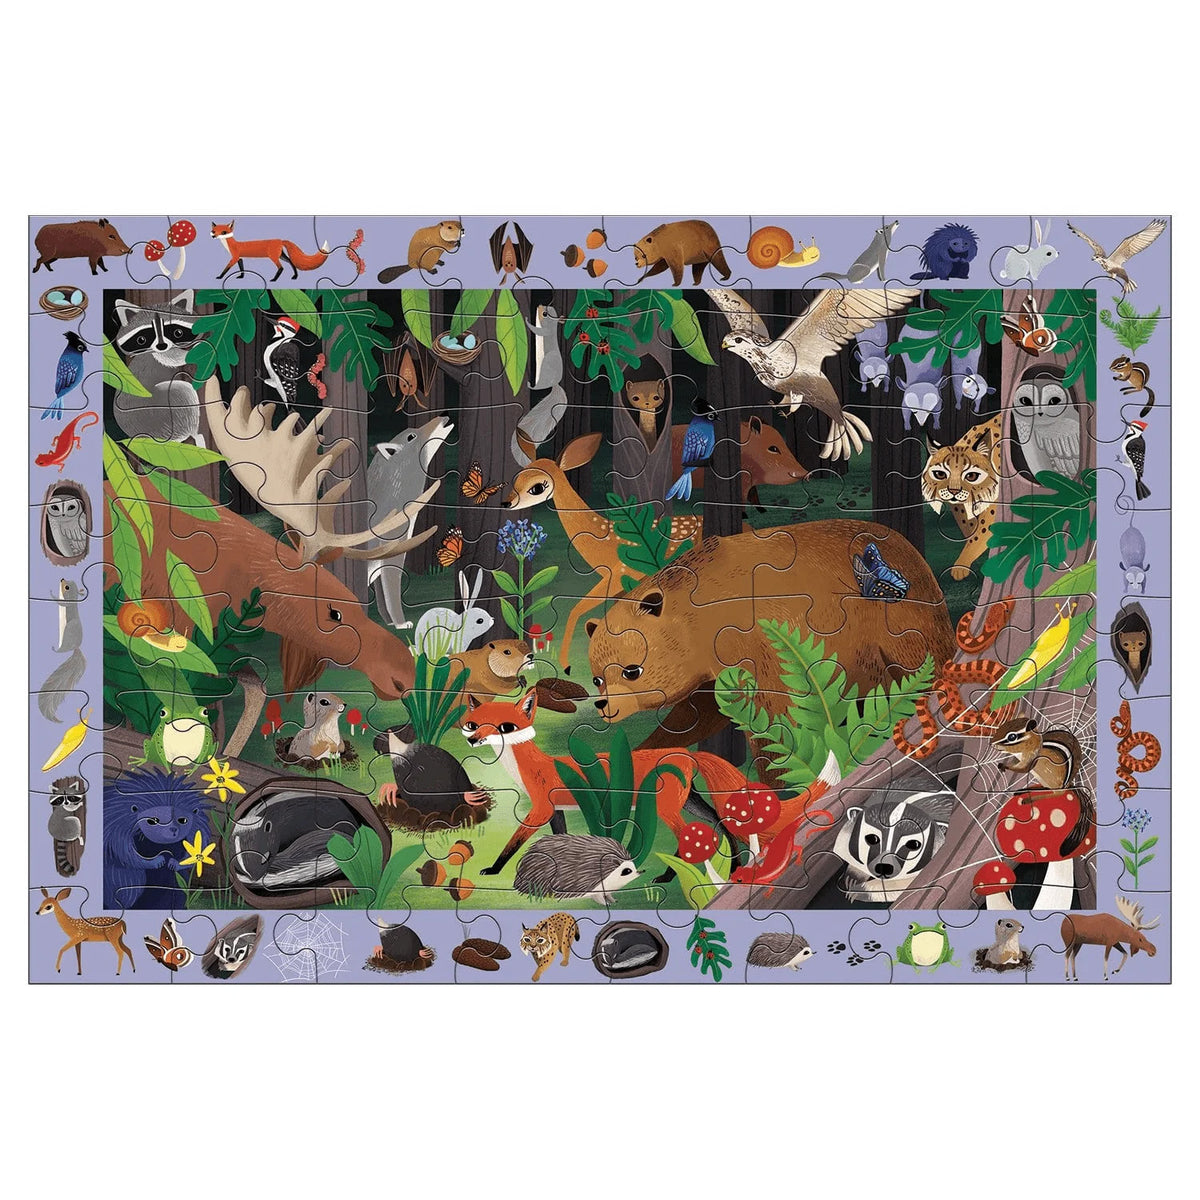 Mudpuppy Search & Find Puzzle - Woodland Forest